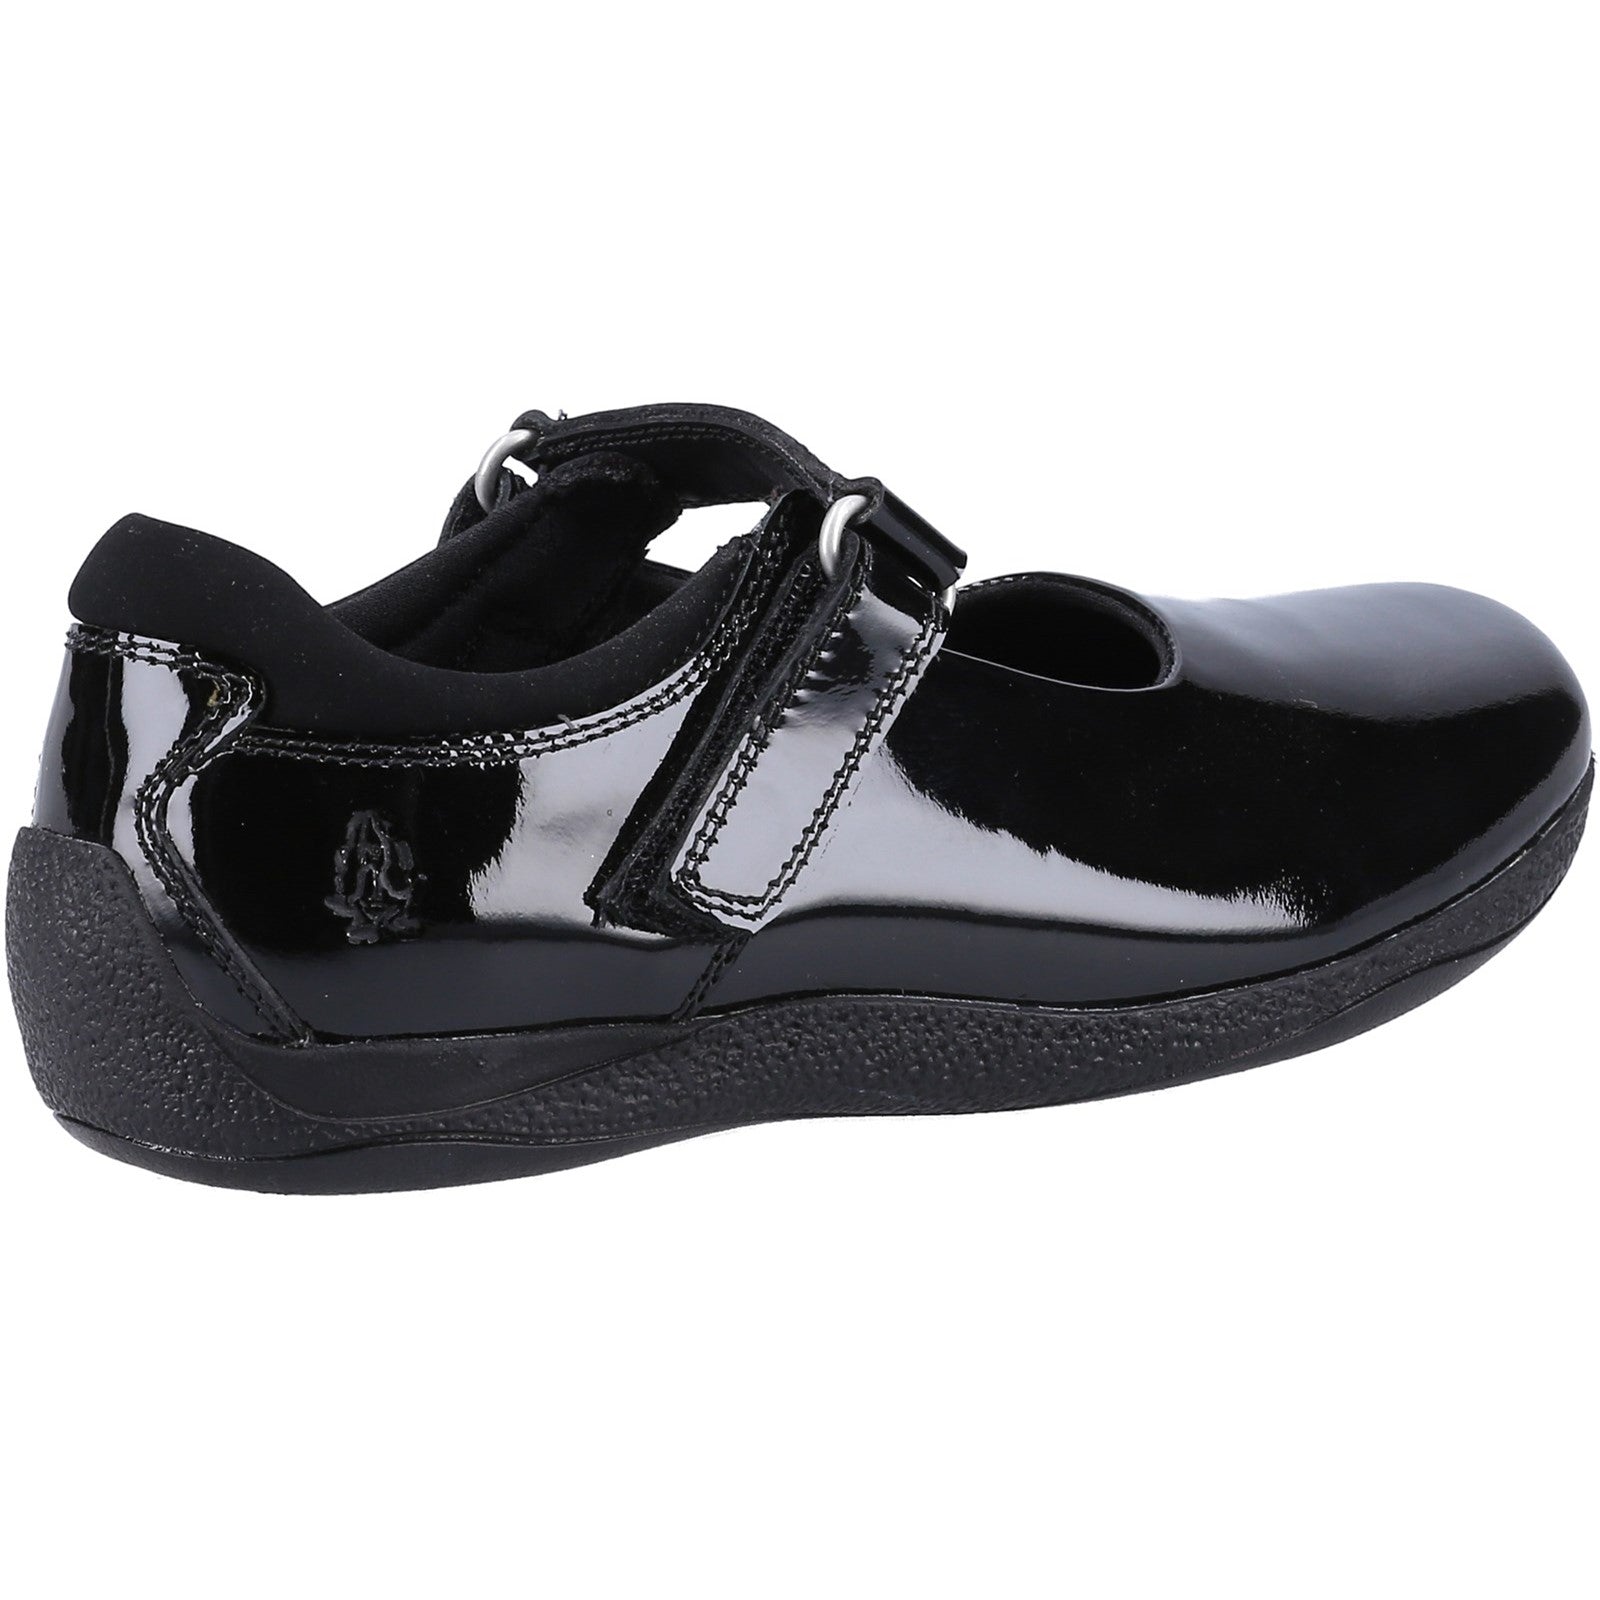 Hush Puppies Girls Marcie Patent Leather School Shoes - Black